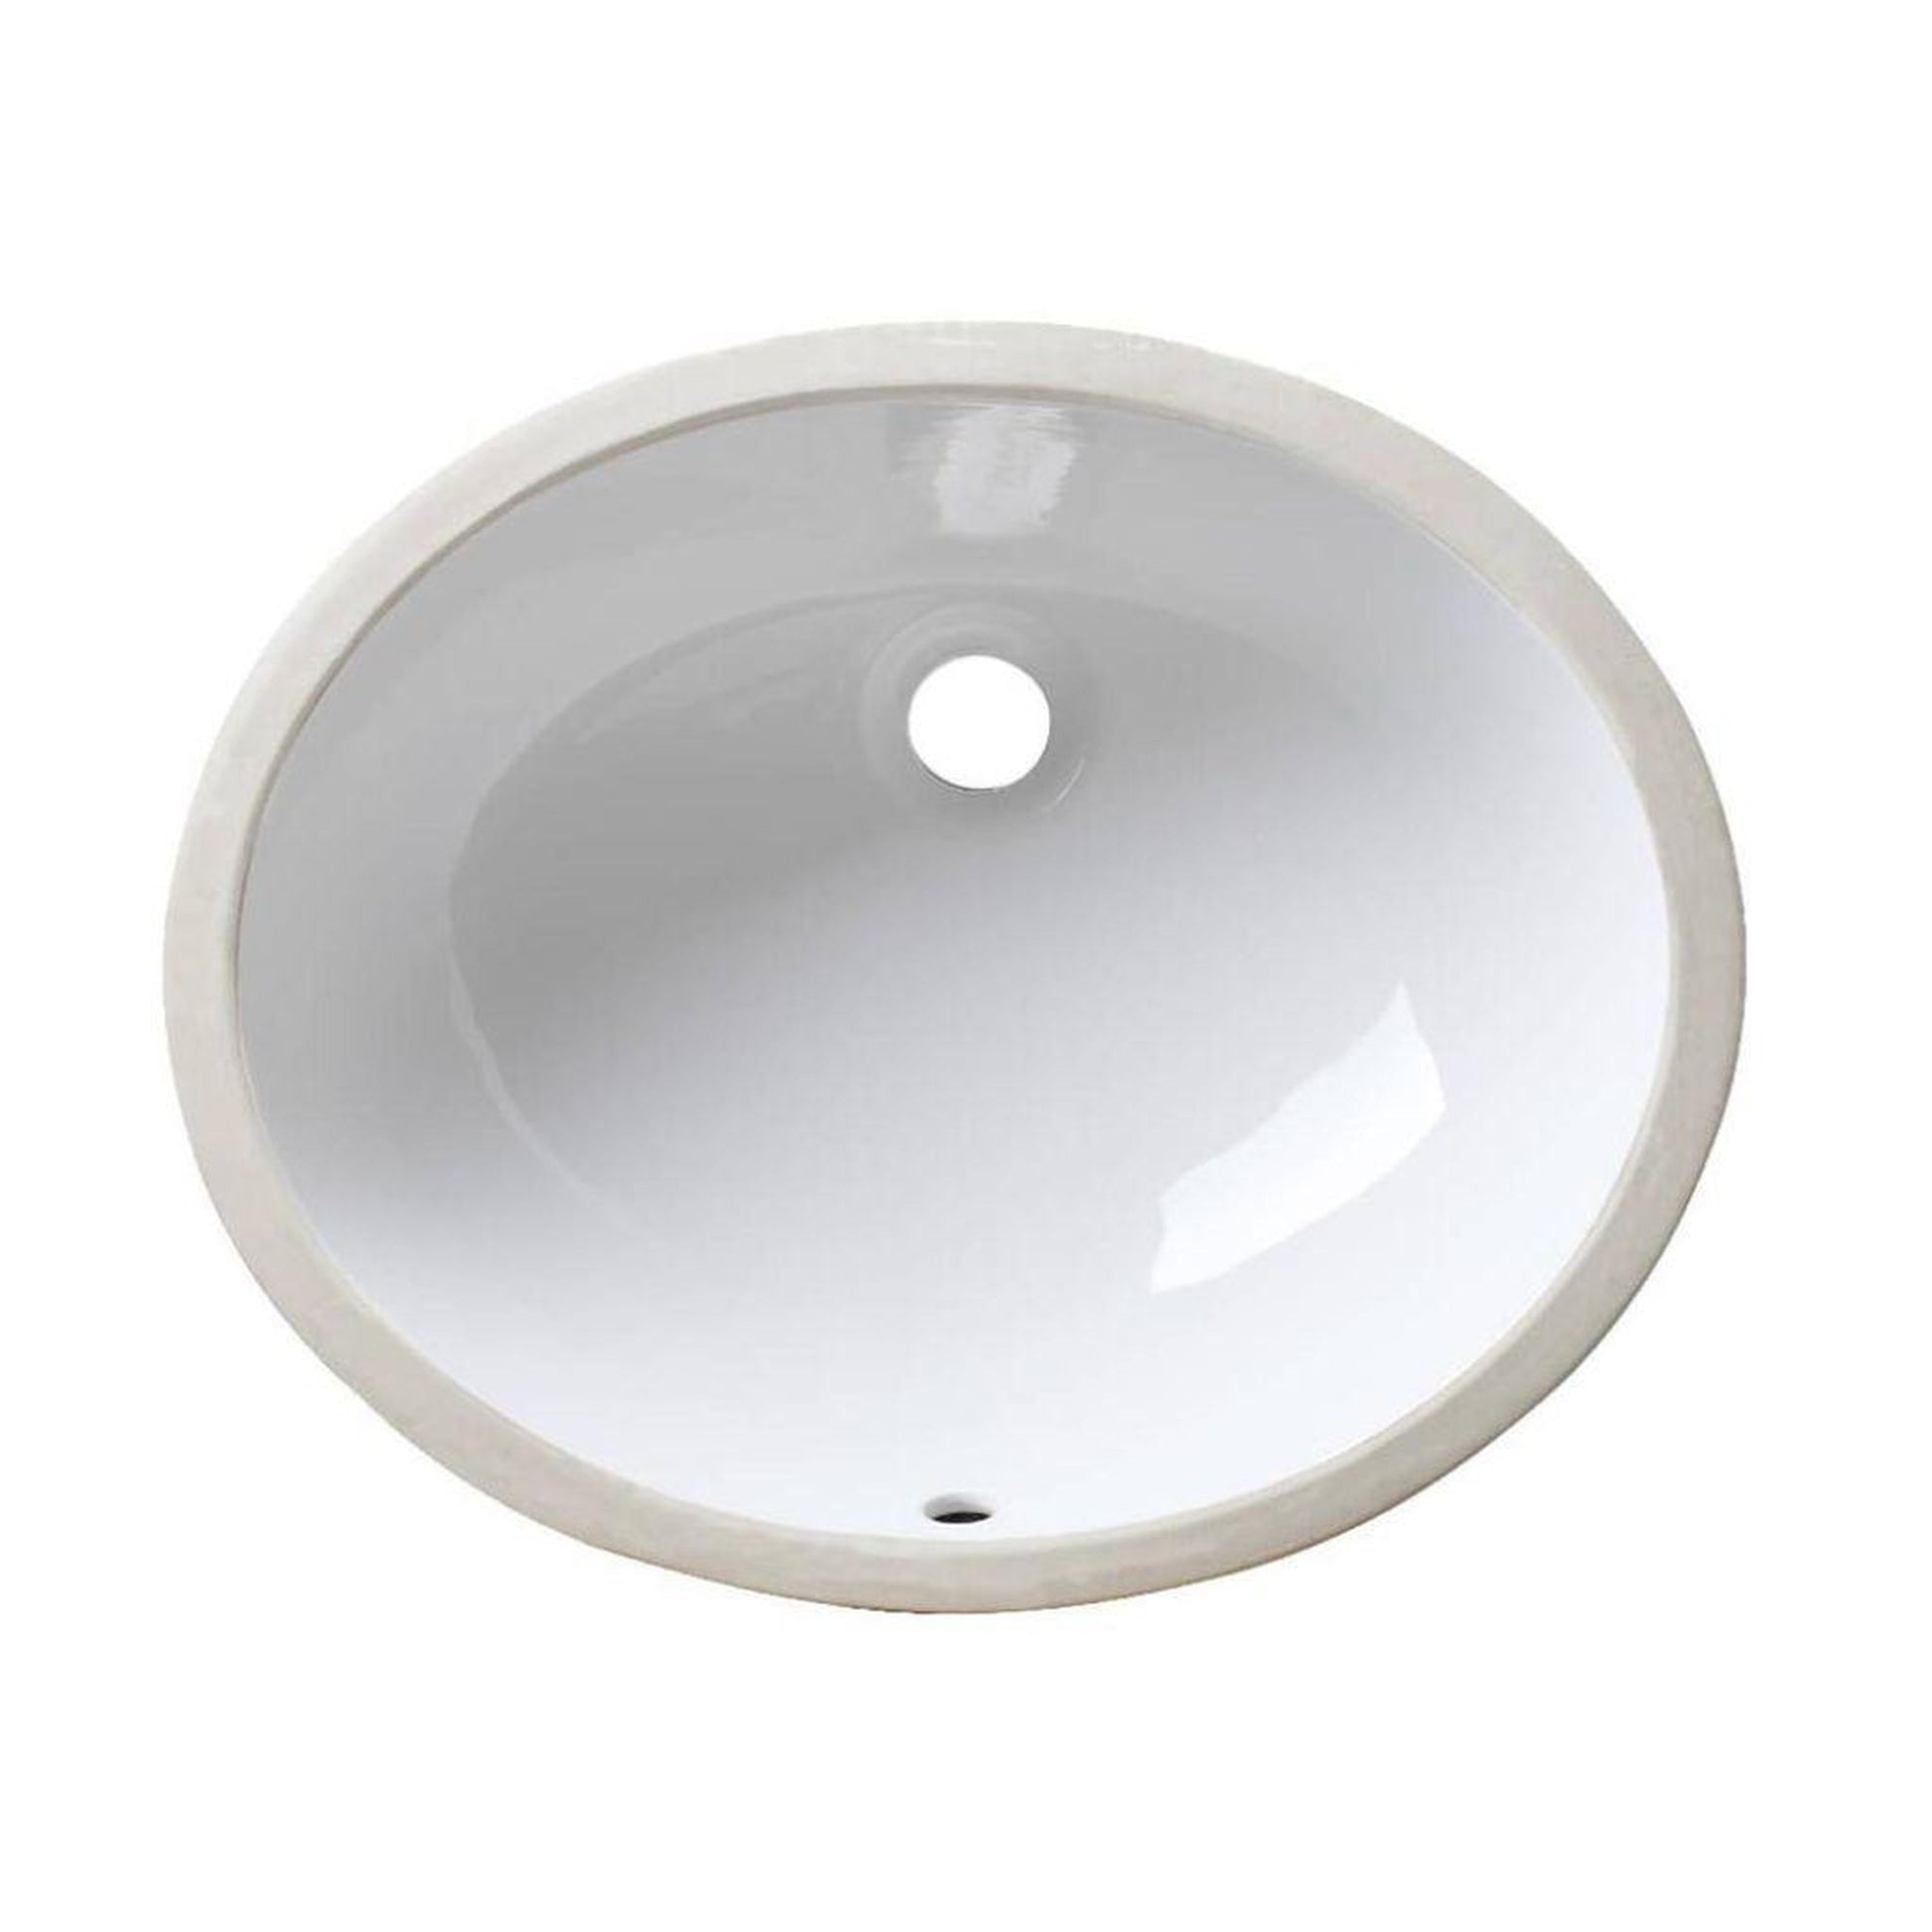 Allora USA 16" X 13.25" Vitreous China White Oval Porcelain Undermount Sink With Overflow